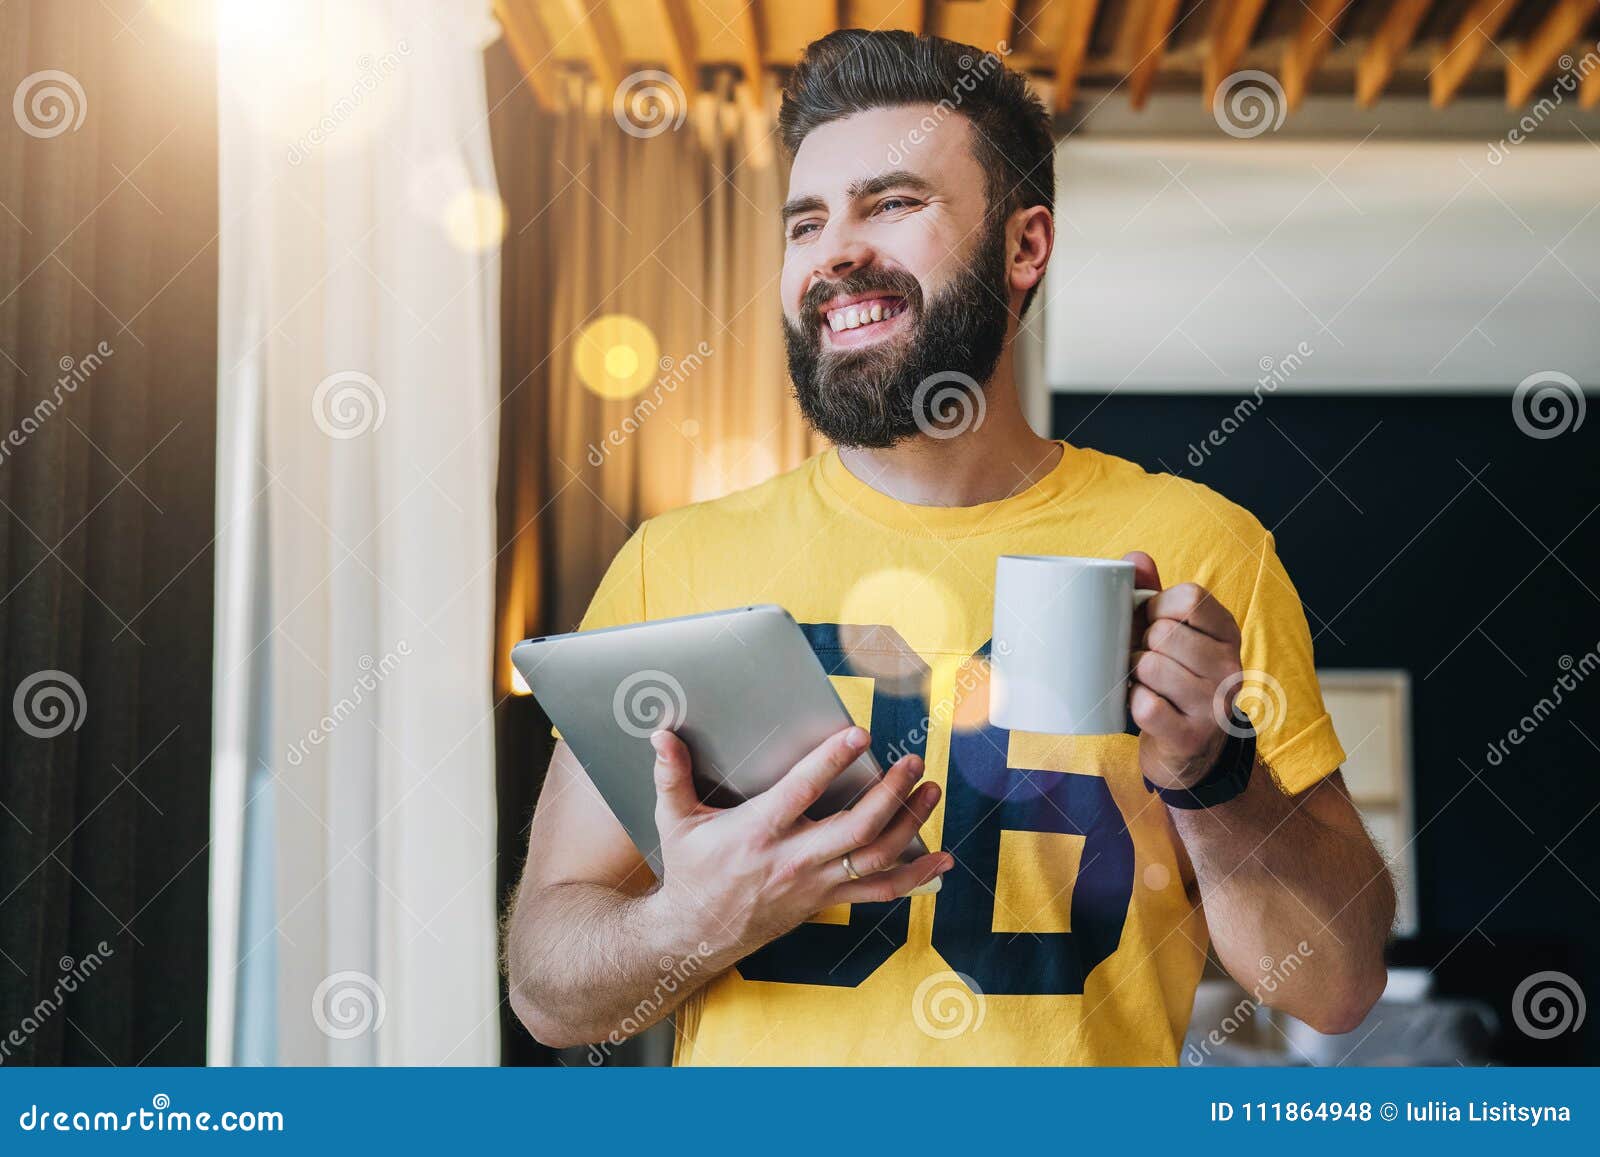 young bearded man stands in room and holding tablet computer while drinking coffee. guy freelancer working at home.